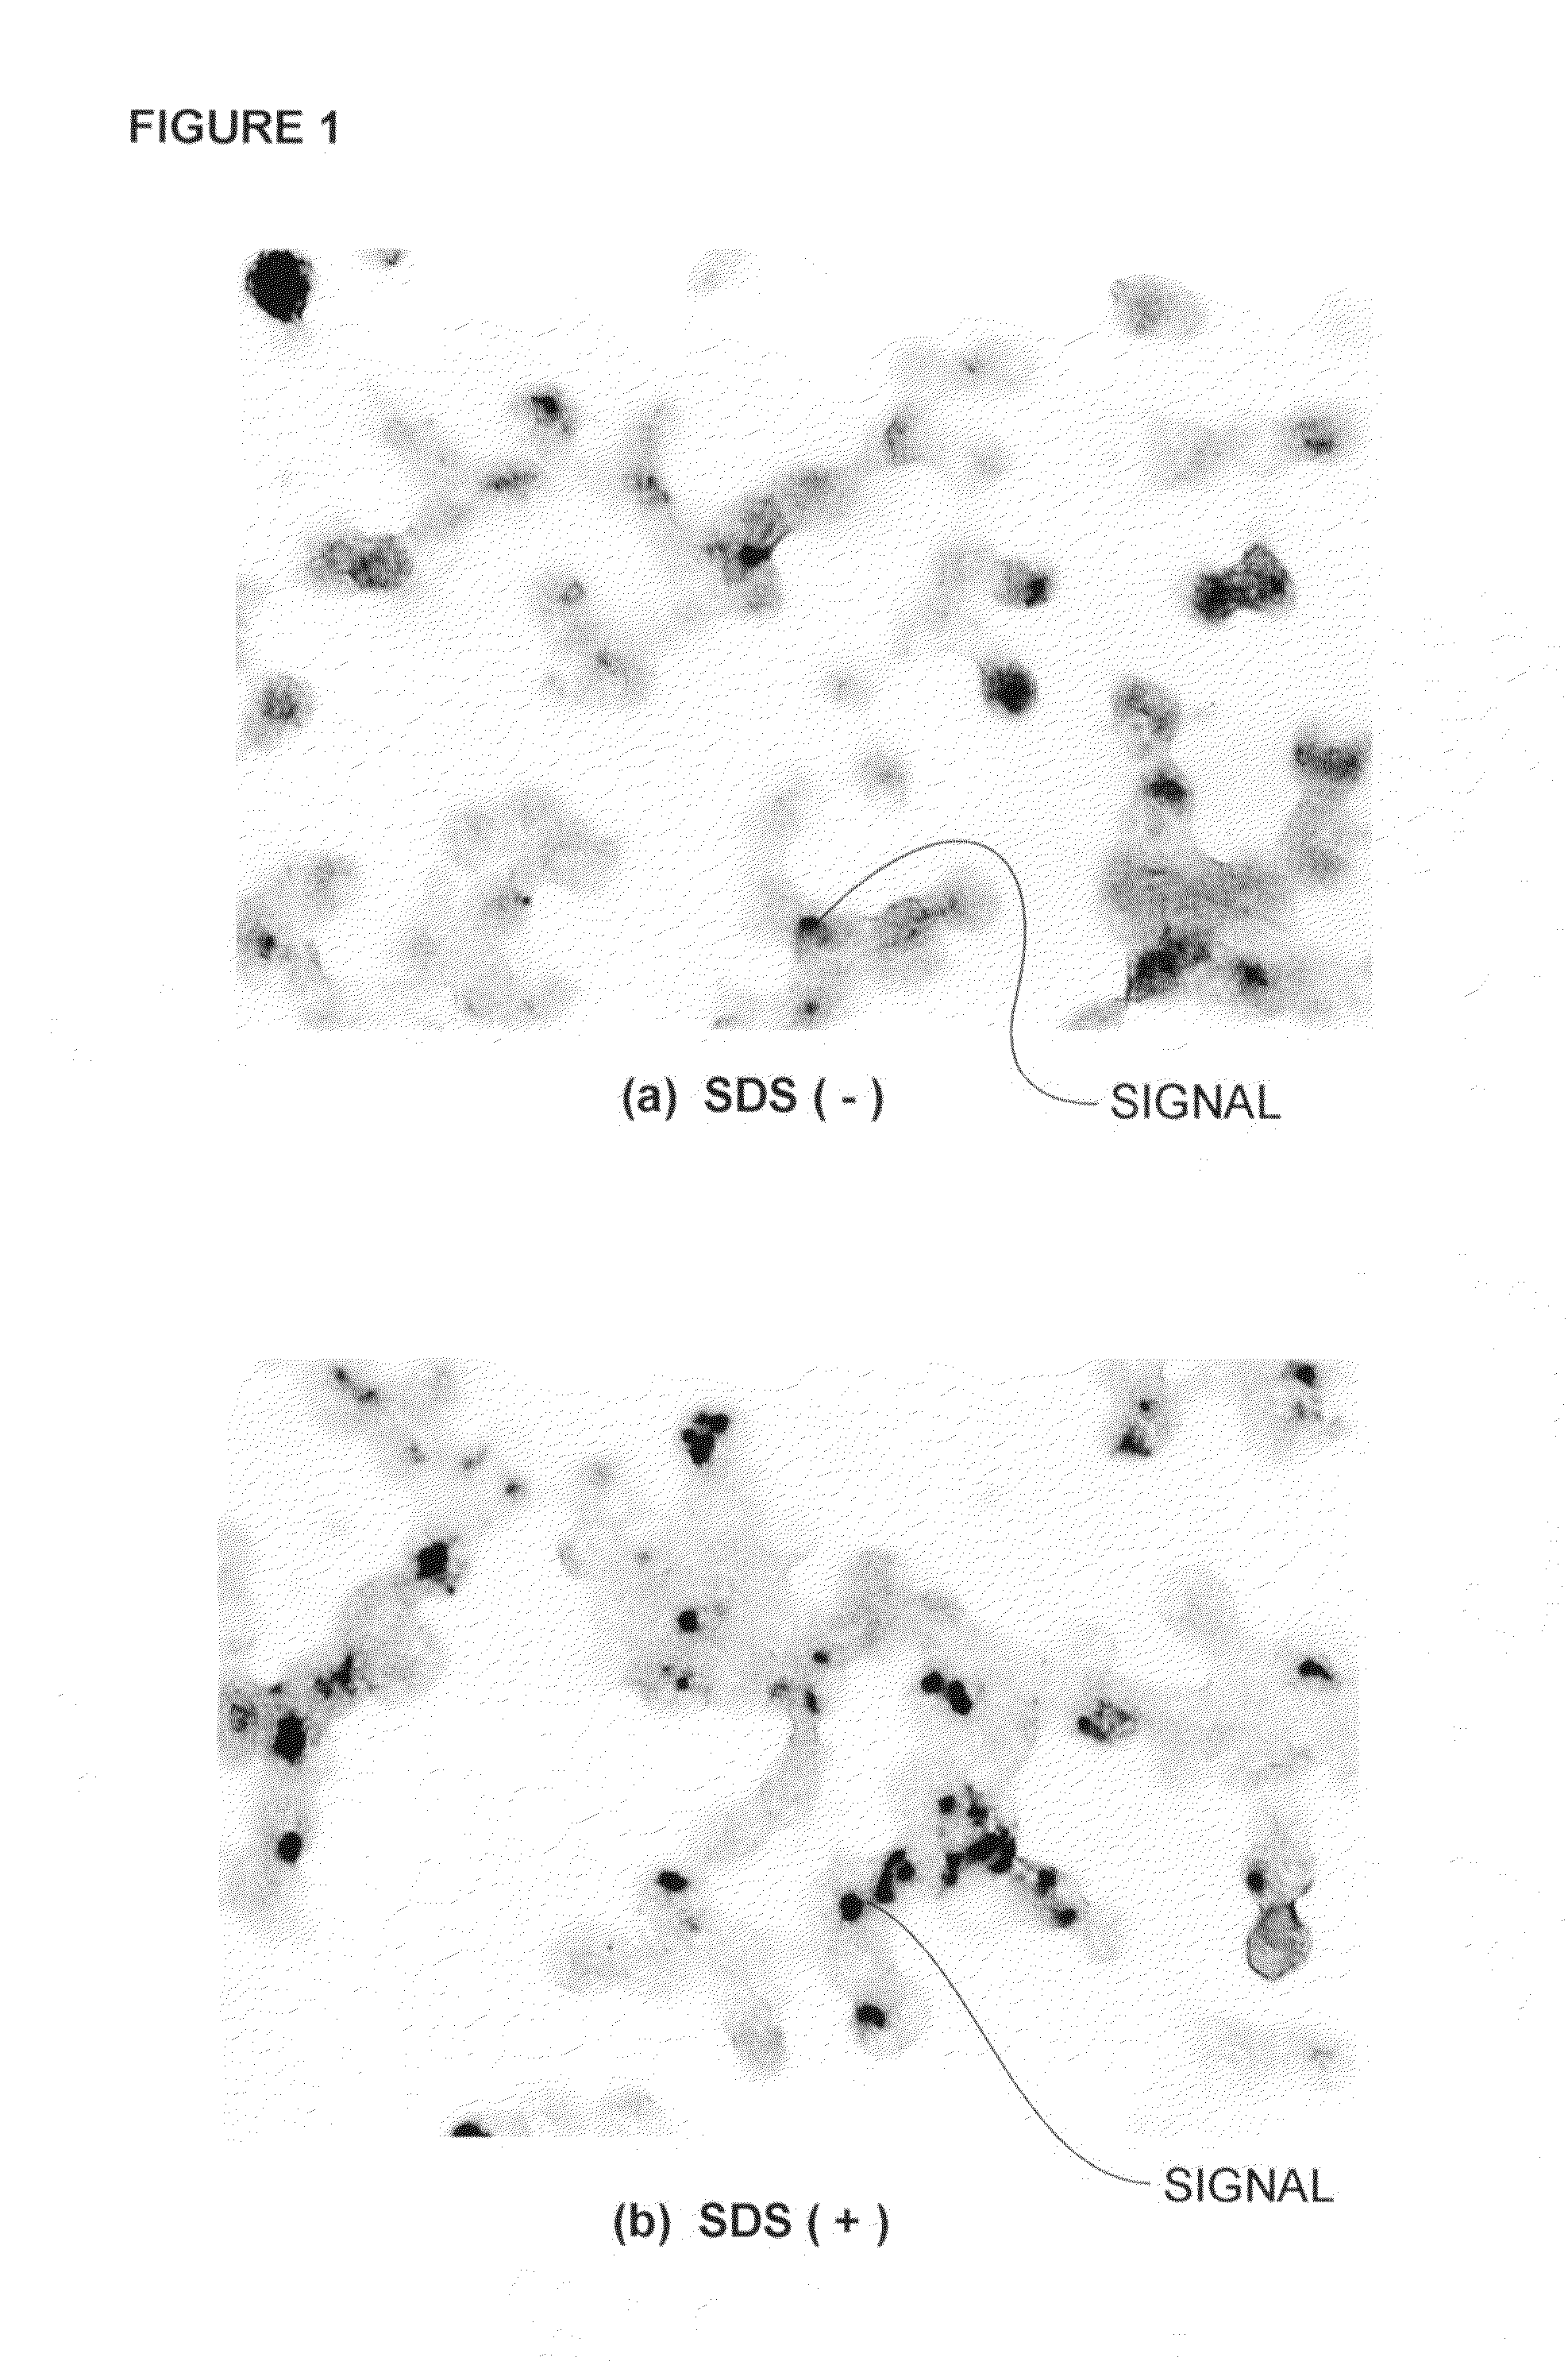 Method for detecting and identifying microorganism causative of infection